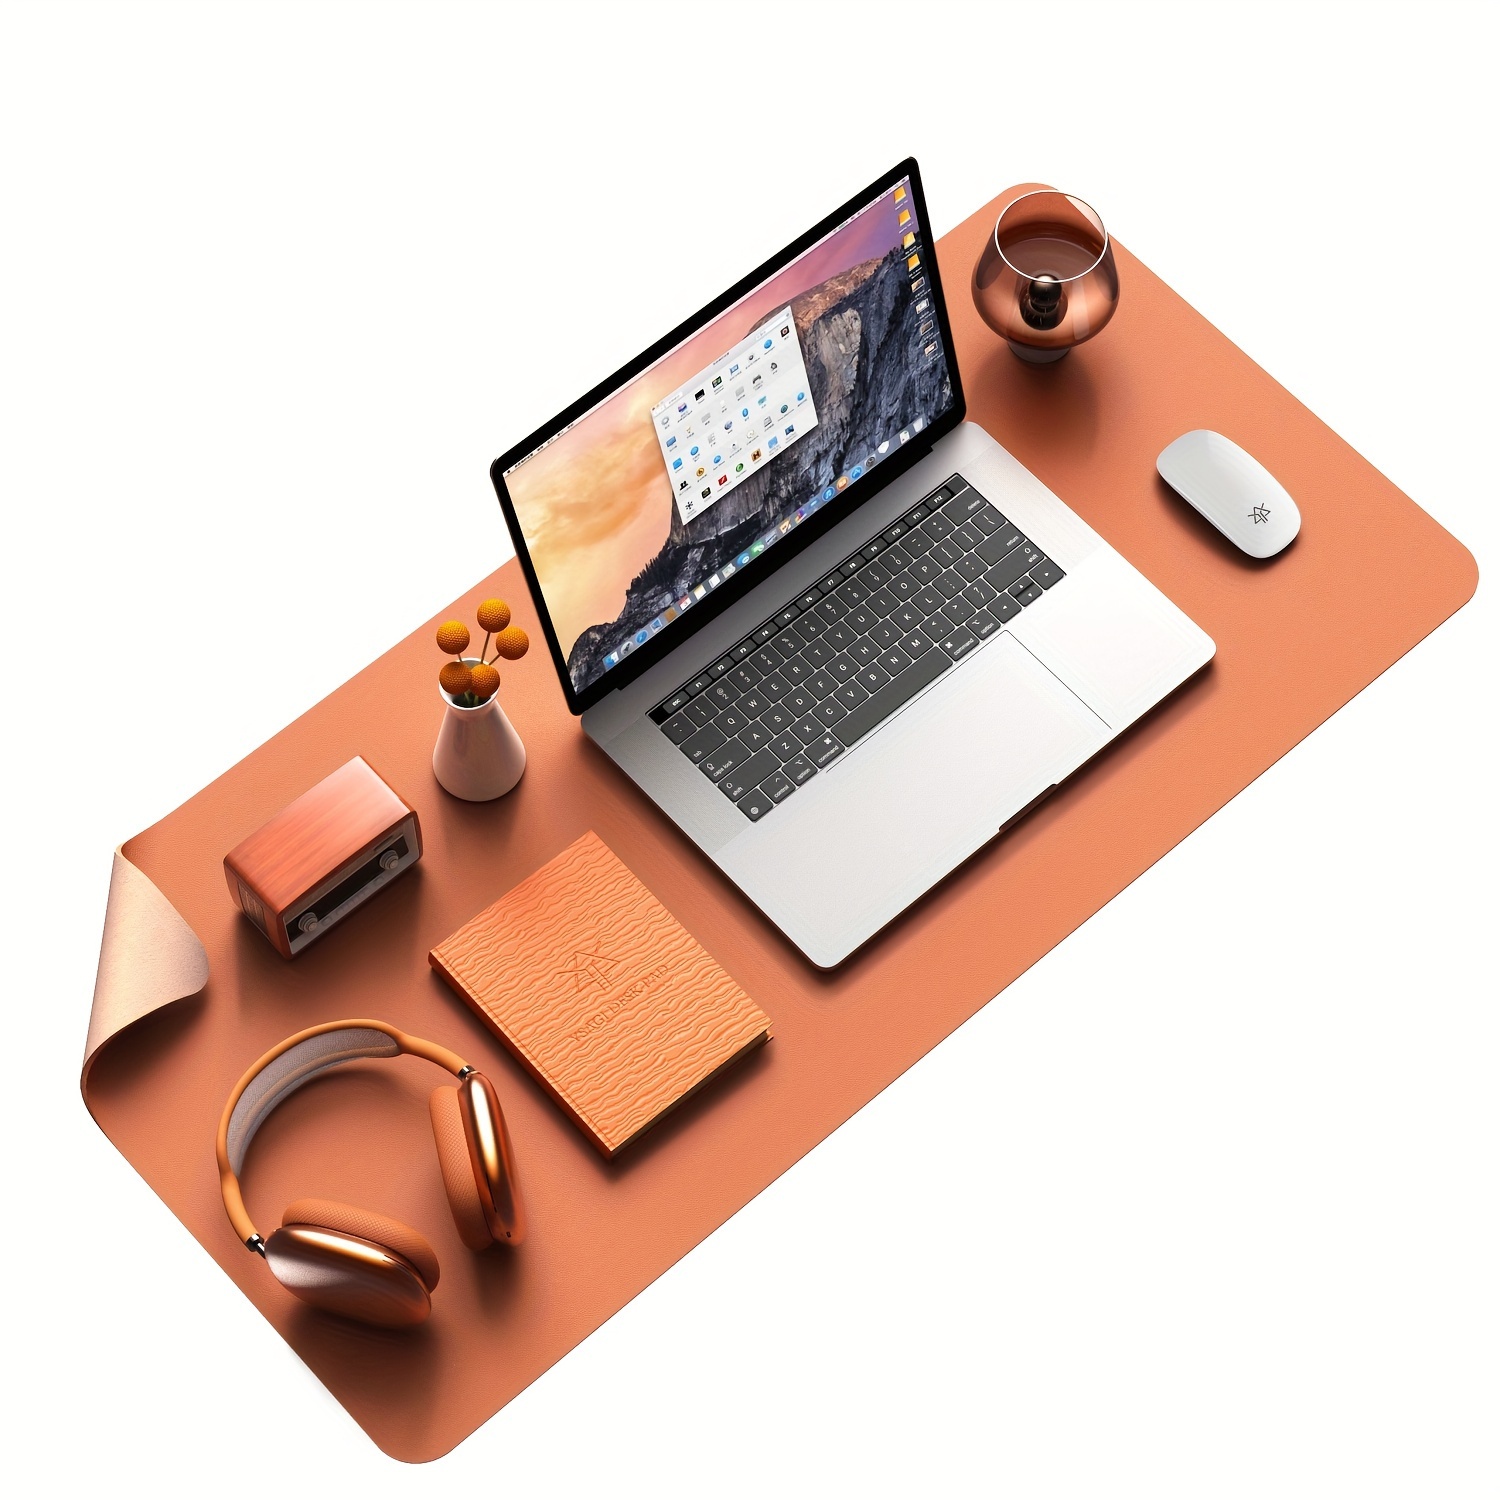 Leather Desk Pad Protector,Mouse Pad,Office Desk Mat, Non-Slip PU Leather  Desk Blotter,Laptop Desk Pad,Waterproof Desk Writing Pad for Office and  Home